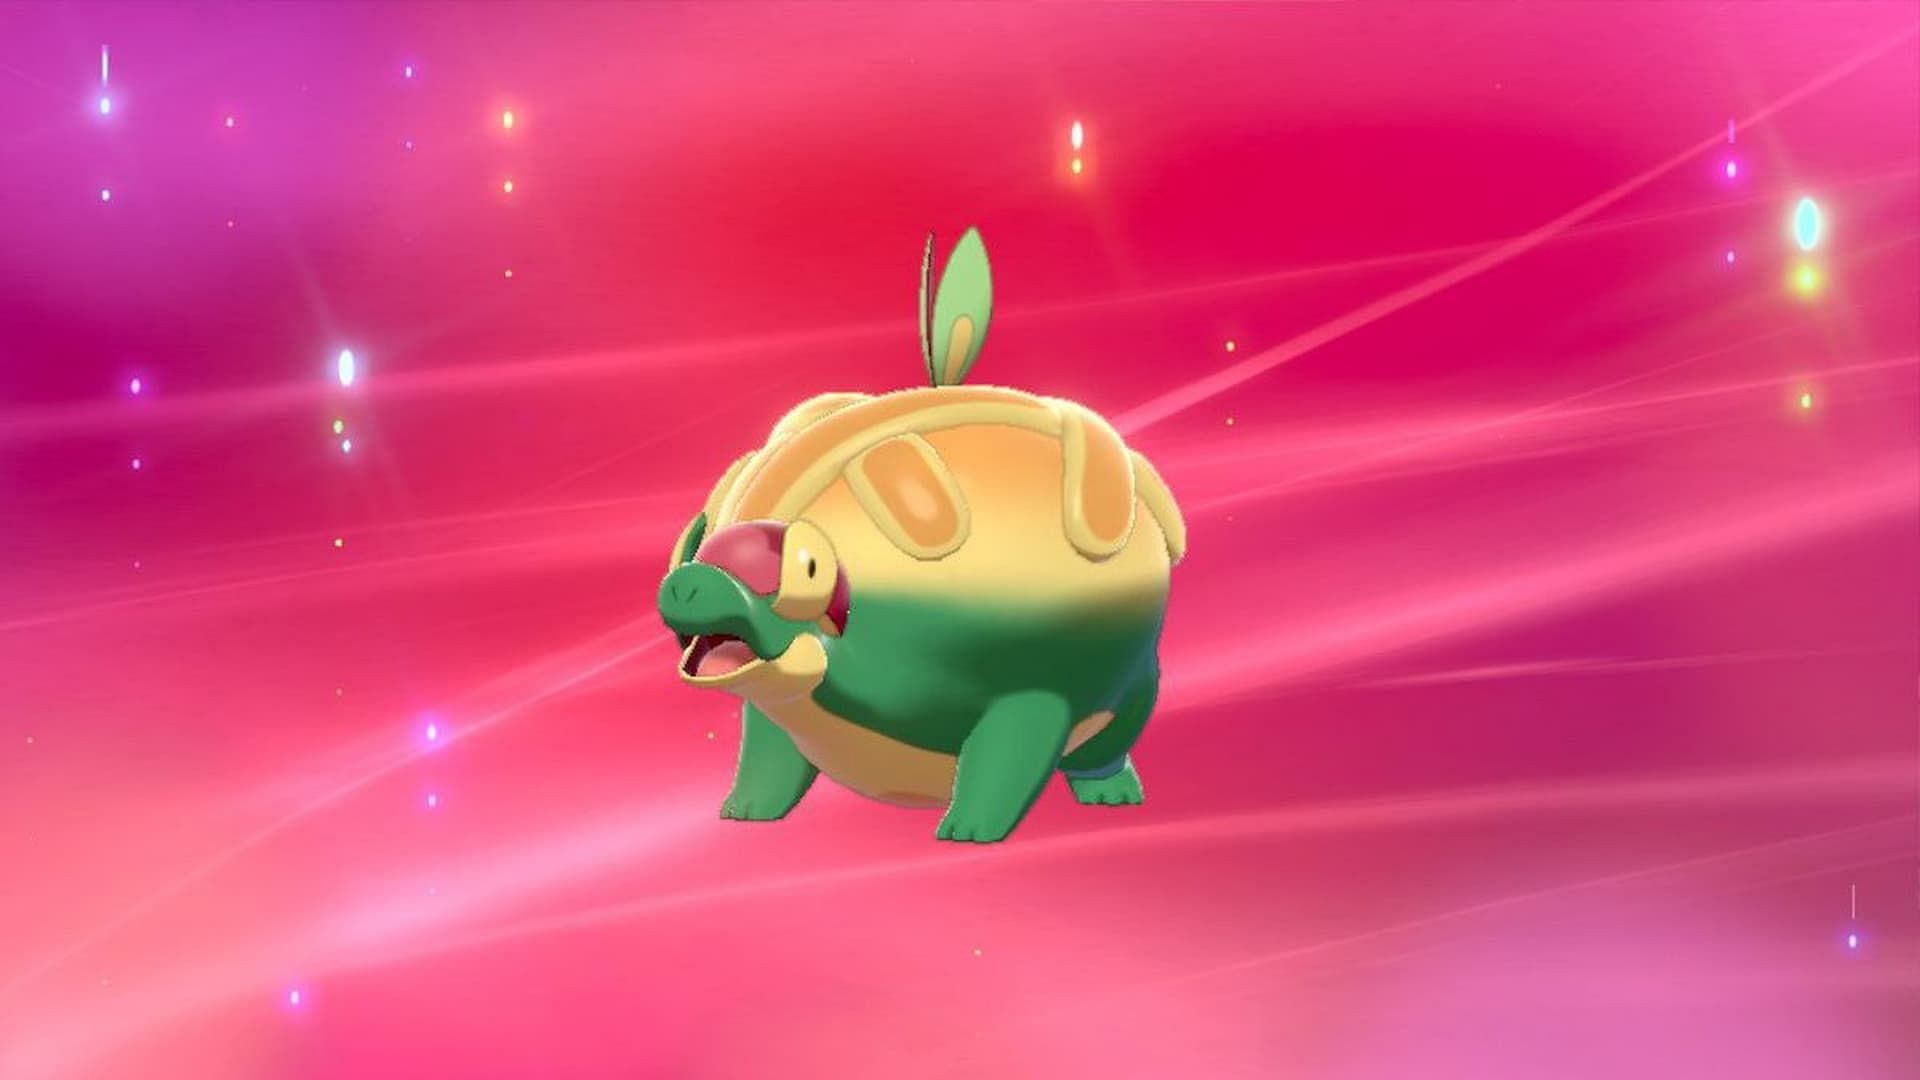 Players can get Appletun by giving Applin a Sweet Apple (Image via The Pokemon Company)